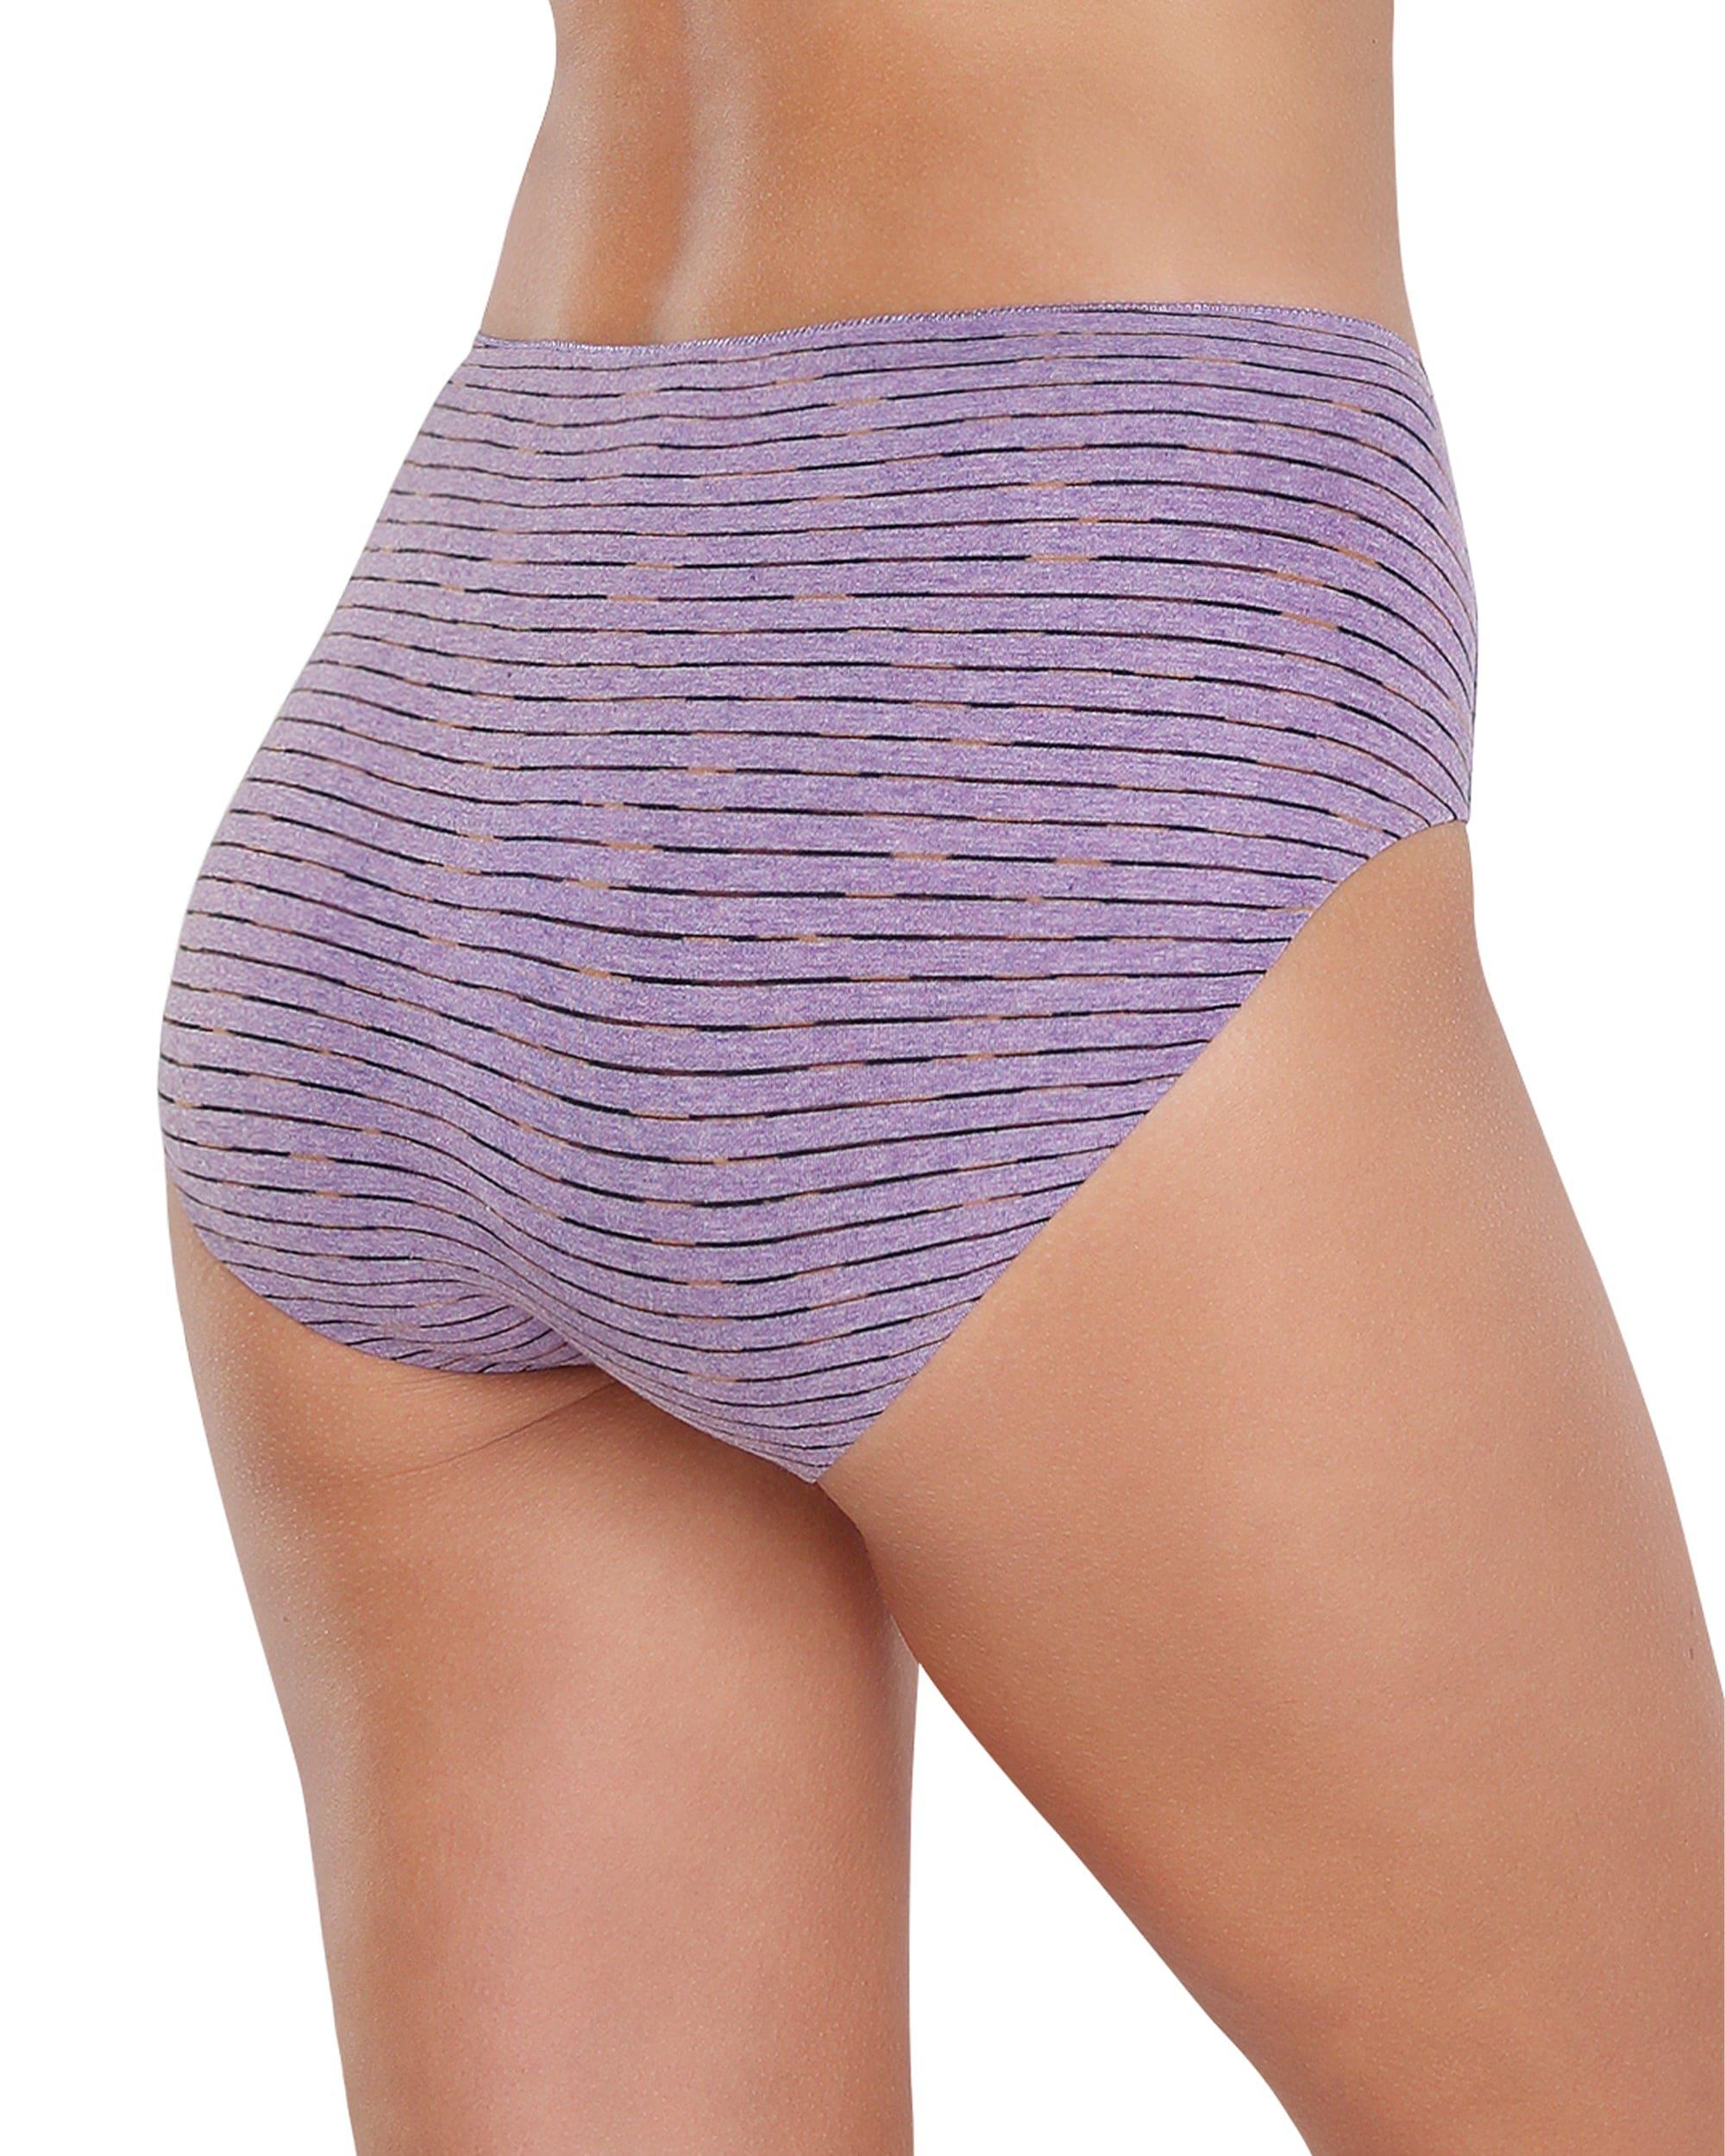 Altheanray Womens Underwear Seamless Cotton Briefs Panties for